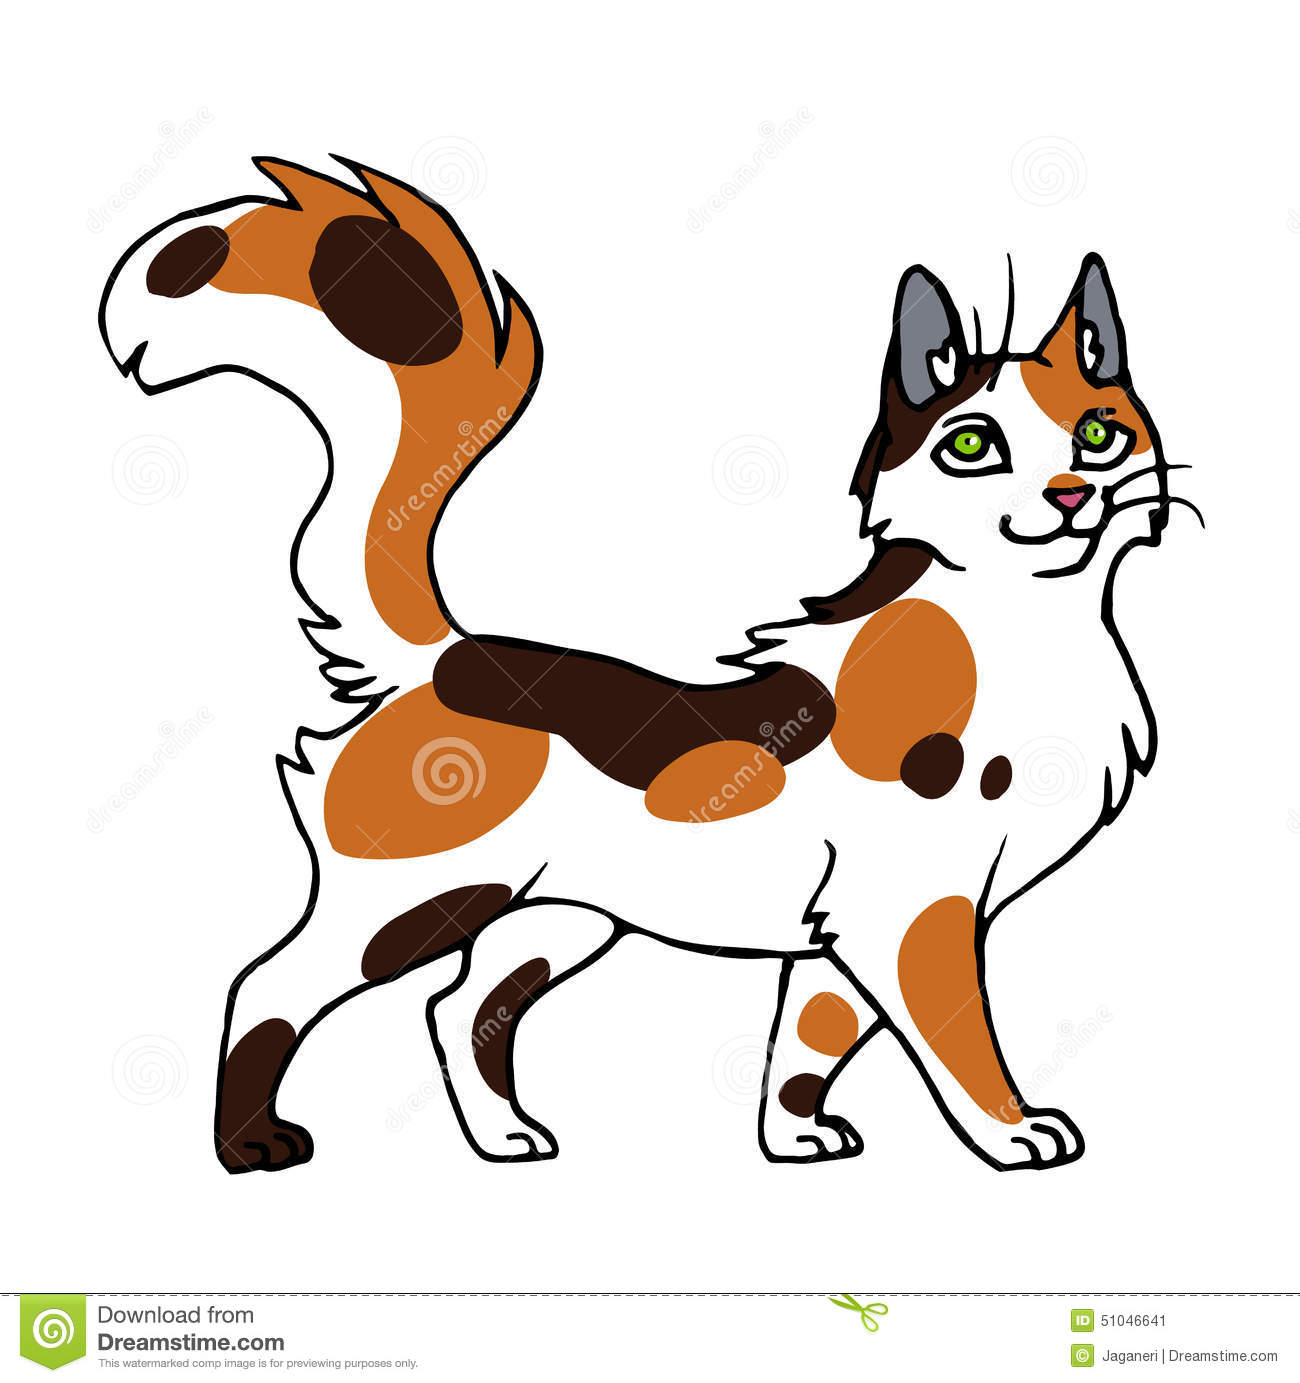 Calico Cat clipart #2, Download drawings